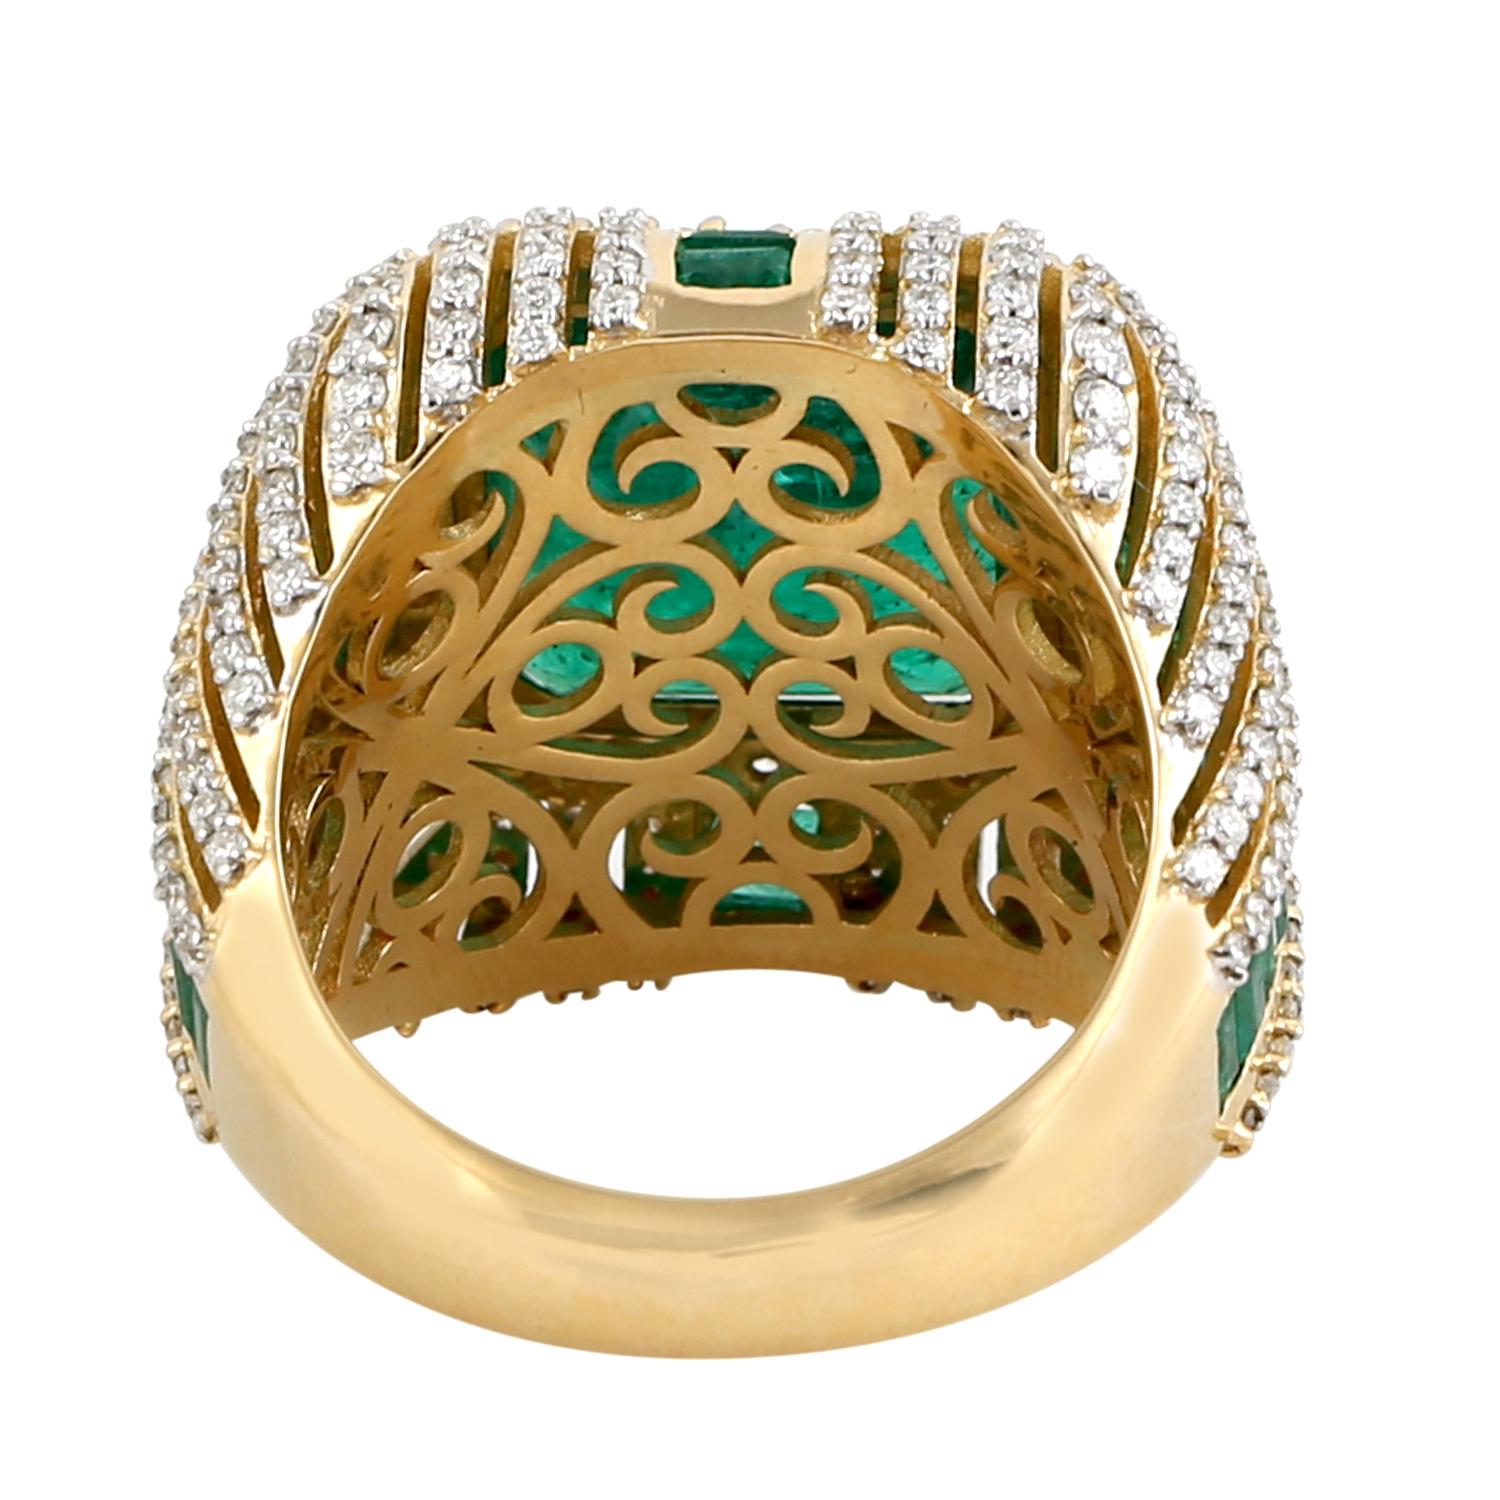 Women's Vintage Looking Zambian Emerald Cocktail Ring With Diamonds